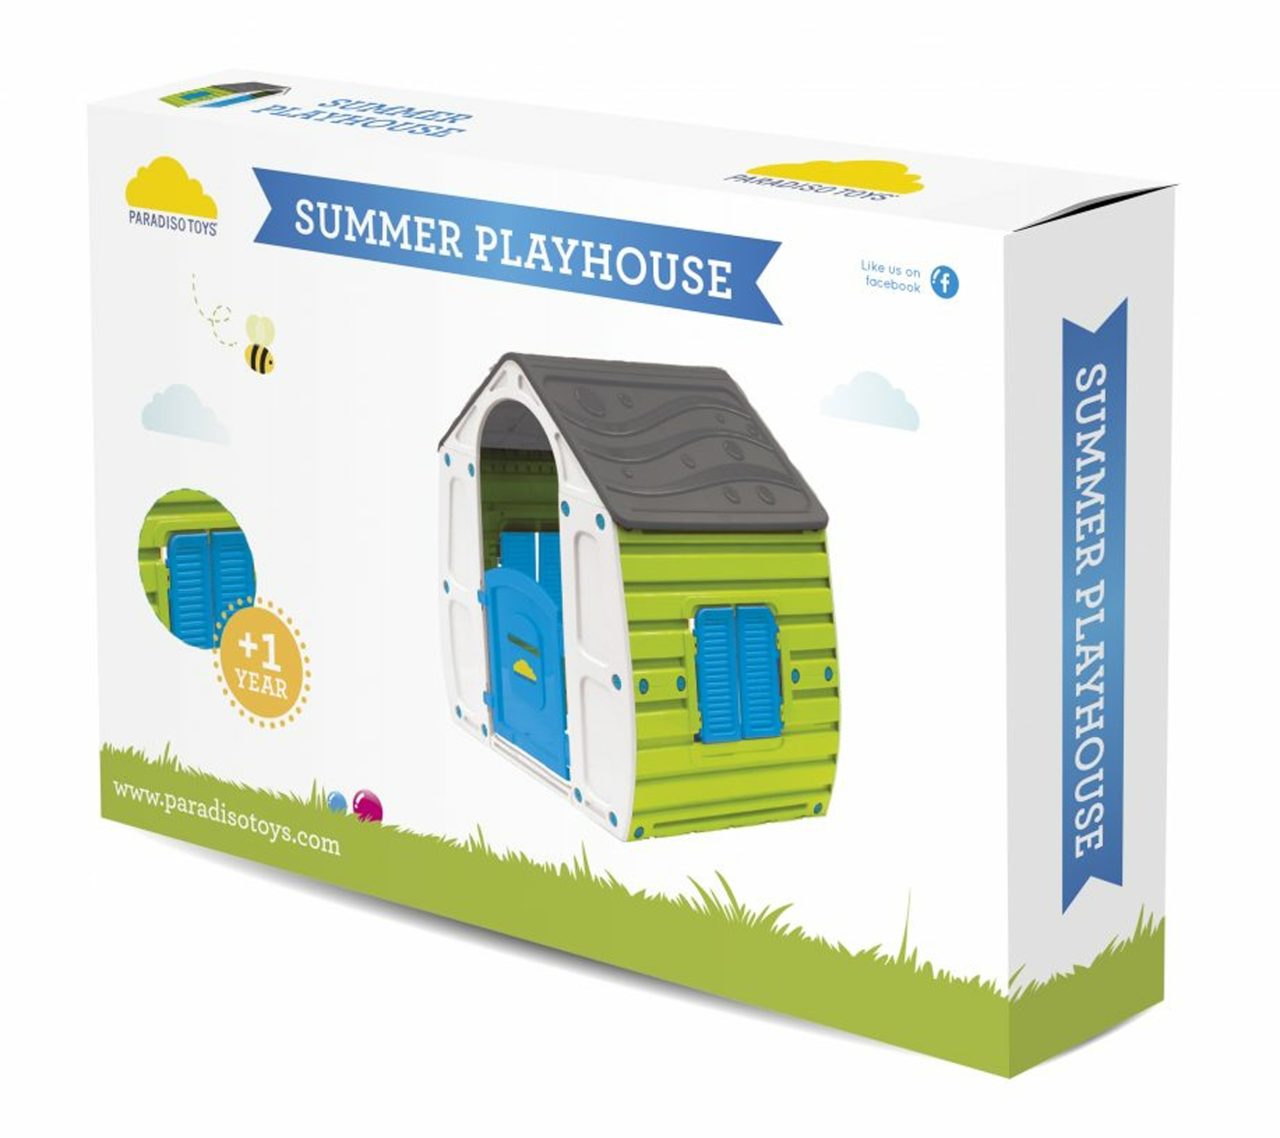 Summer Playhouse. Product image of box.